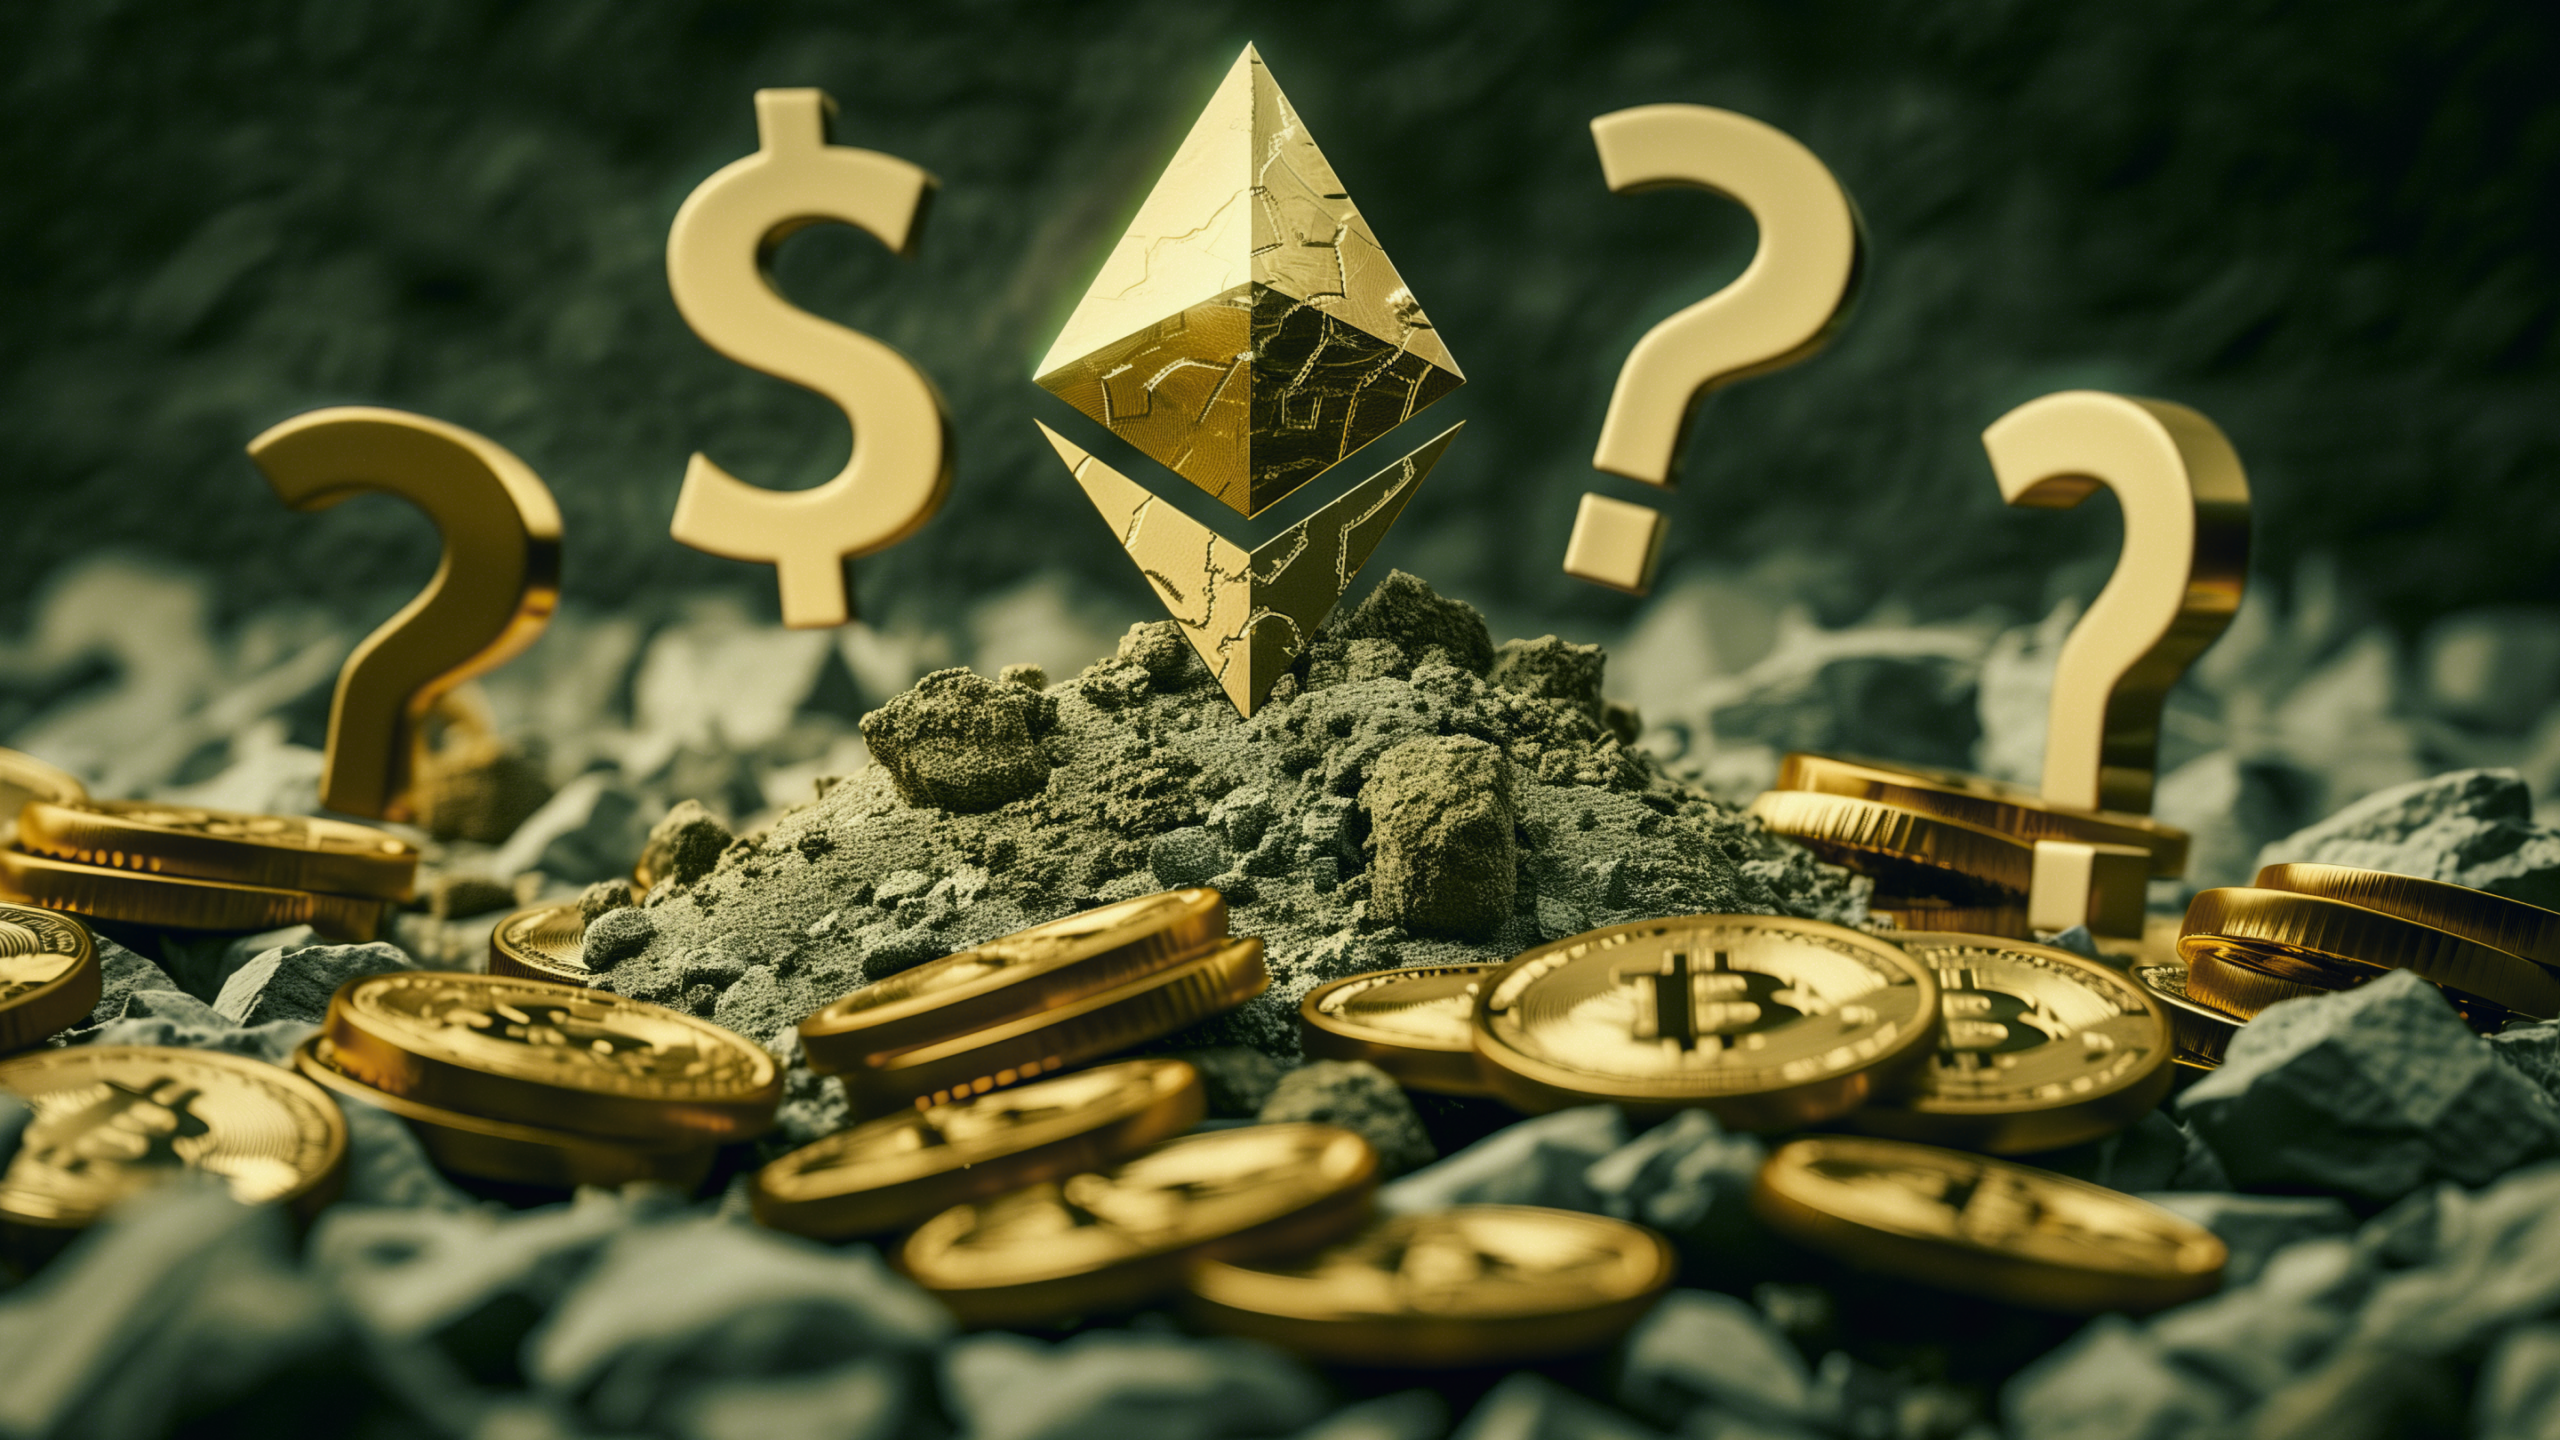 7 Frequently Asked Questions About Investing in Cryptocurrencies